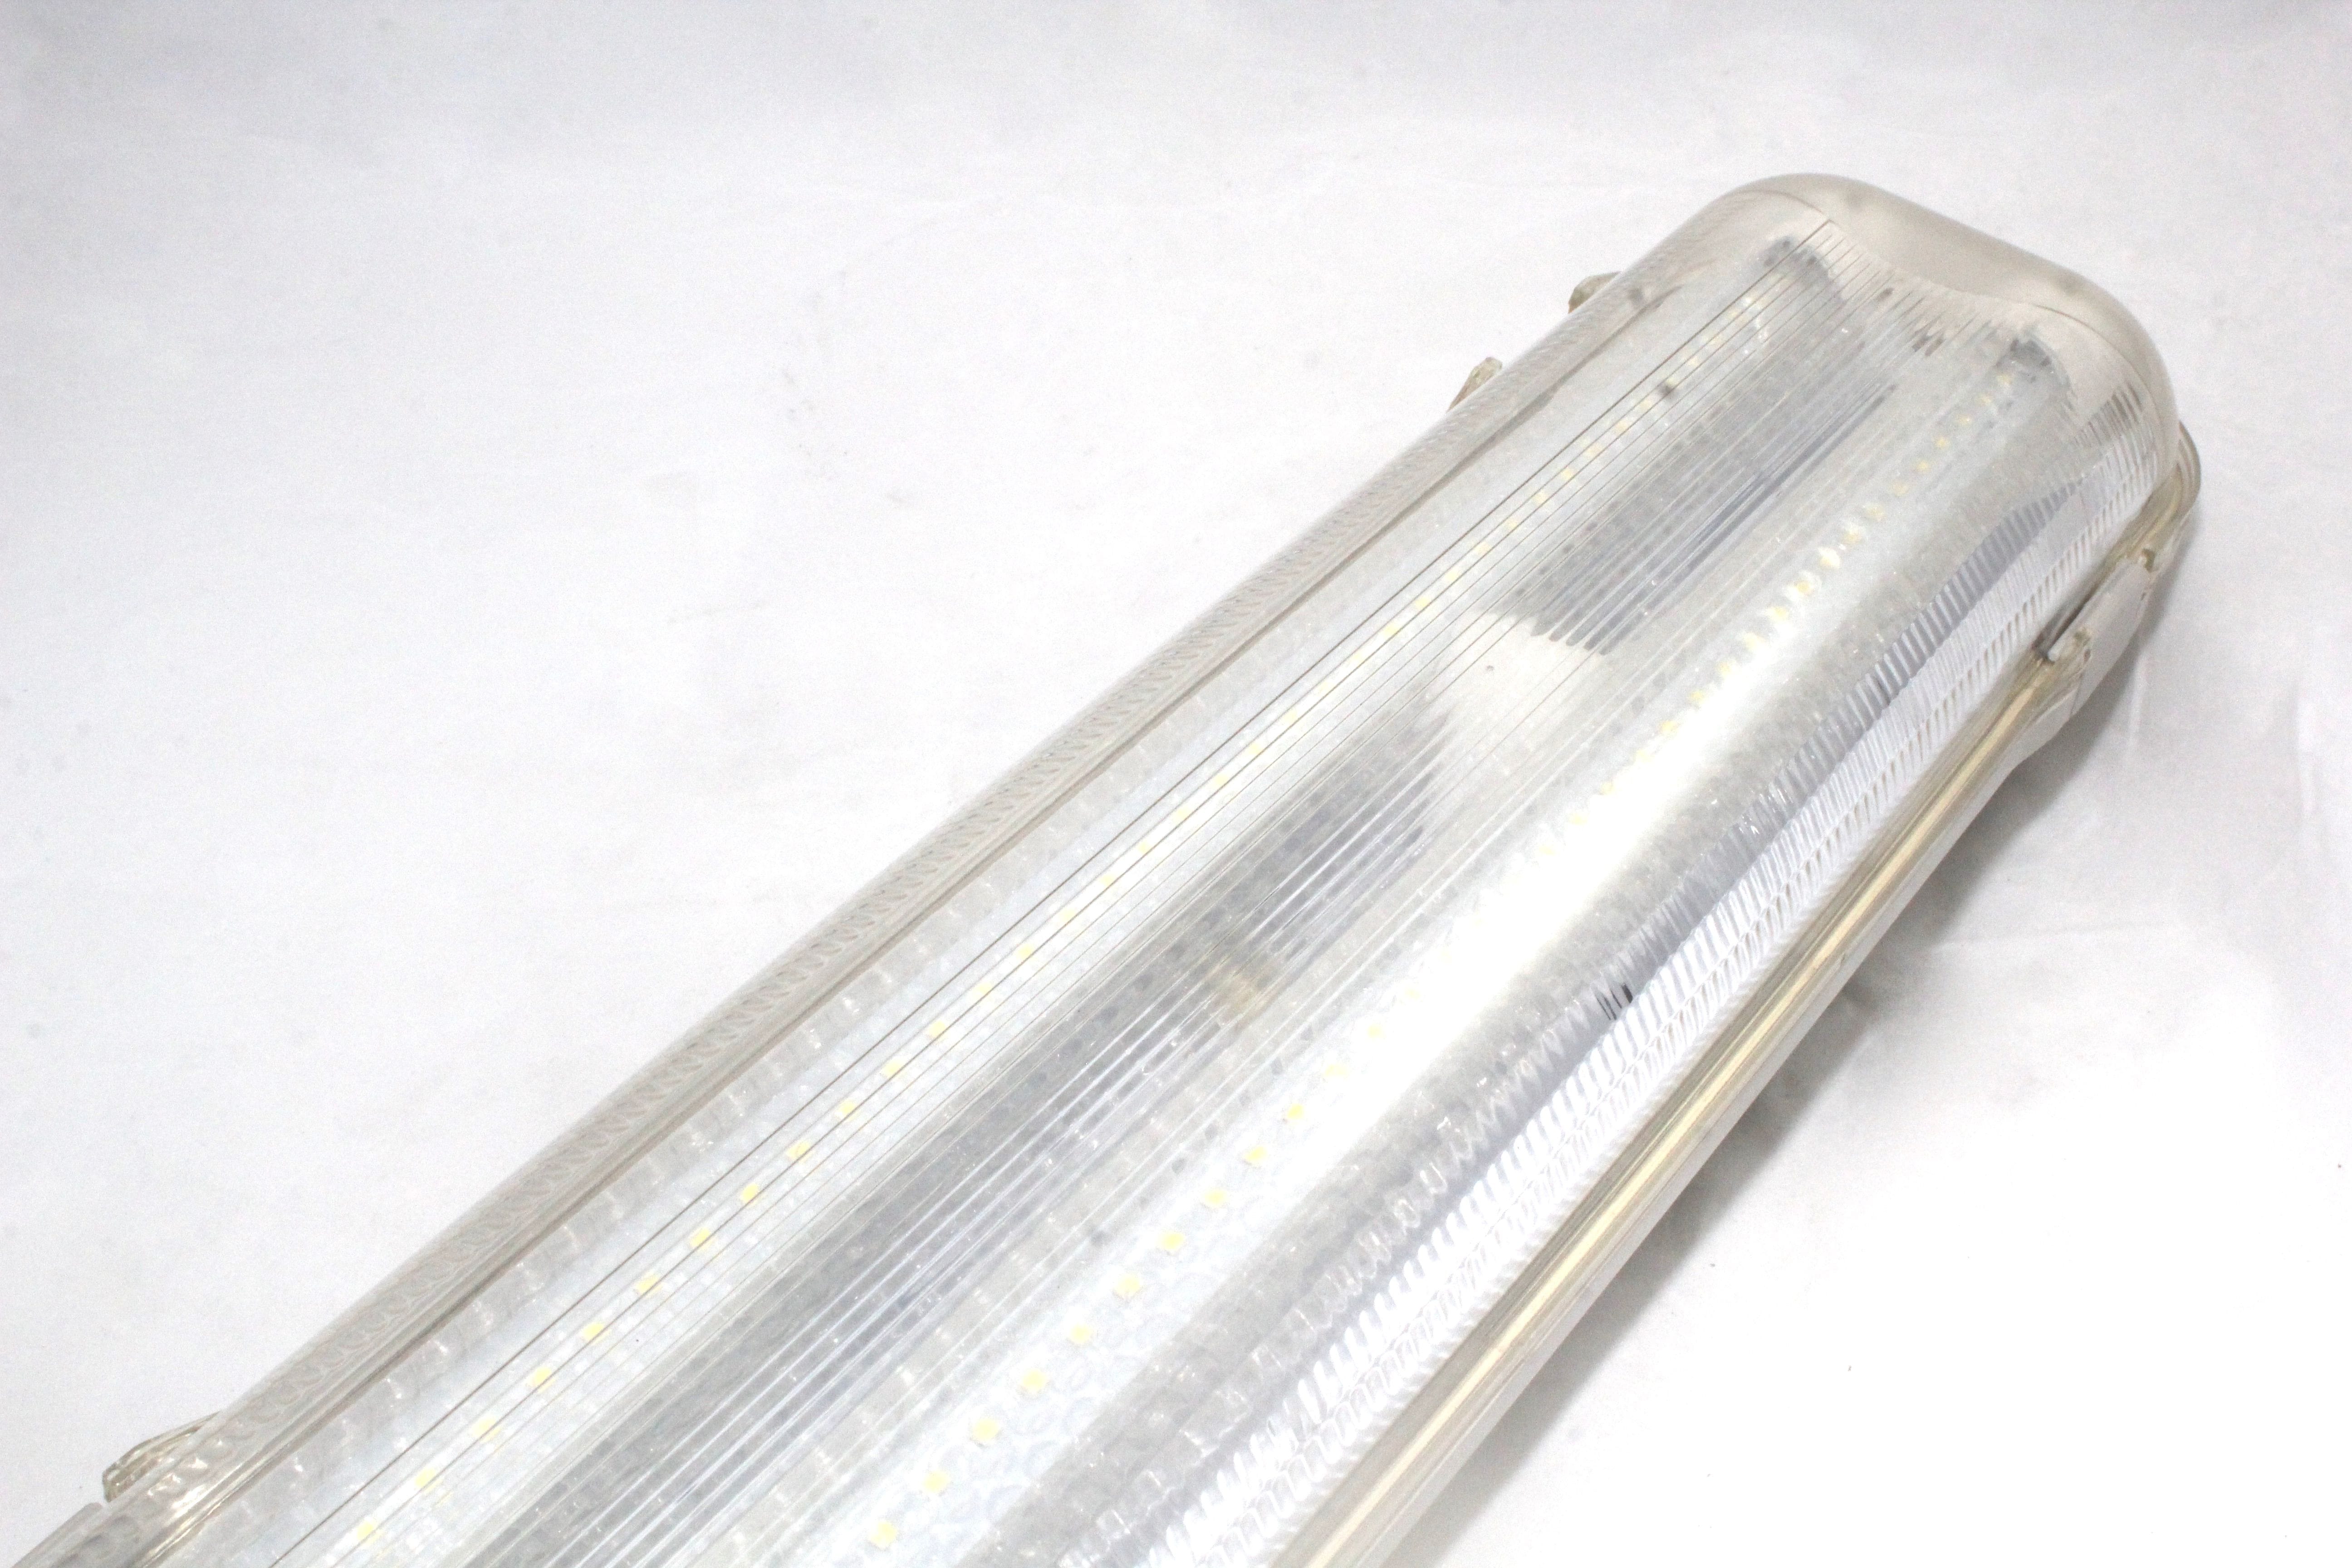 Light fitting IP65 rated with twin 18W LED Tubes